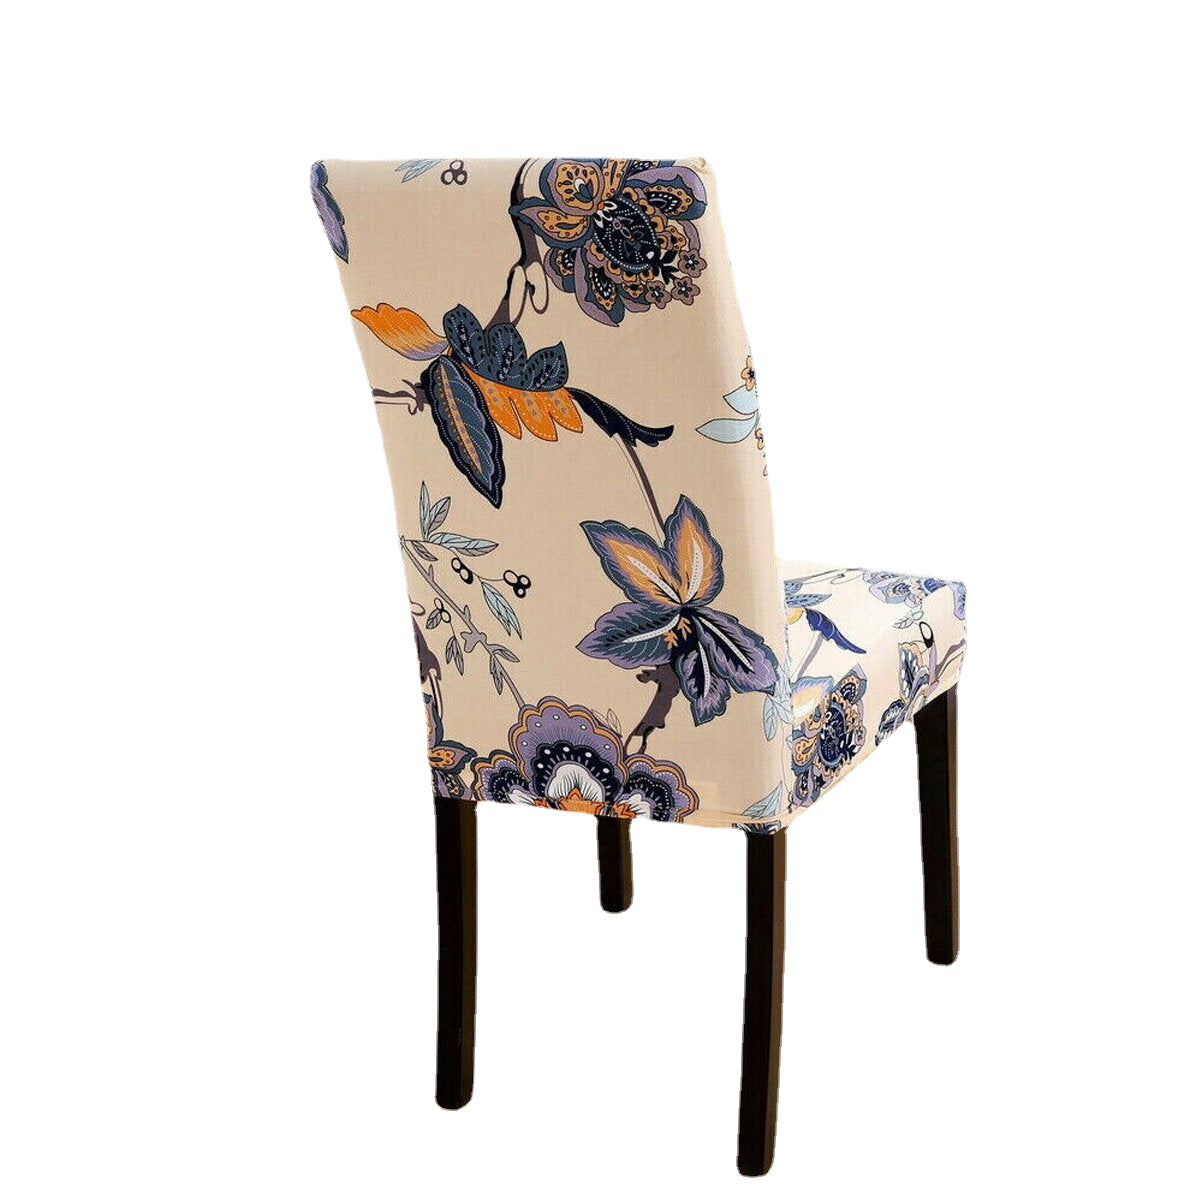 1 Piece Dining Chair Cover Elastic Chair Seat Protector Stretch Slipcover For Wedding Banquet Party Hotel Kitchen Home Office Furniture Decorations